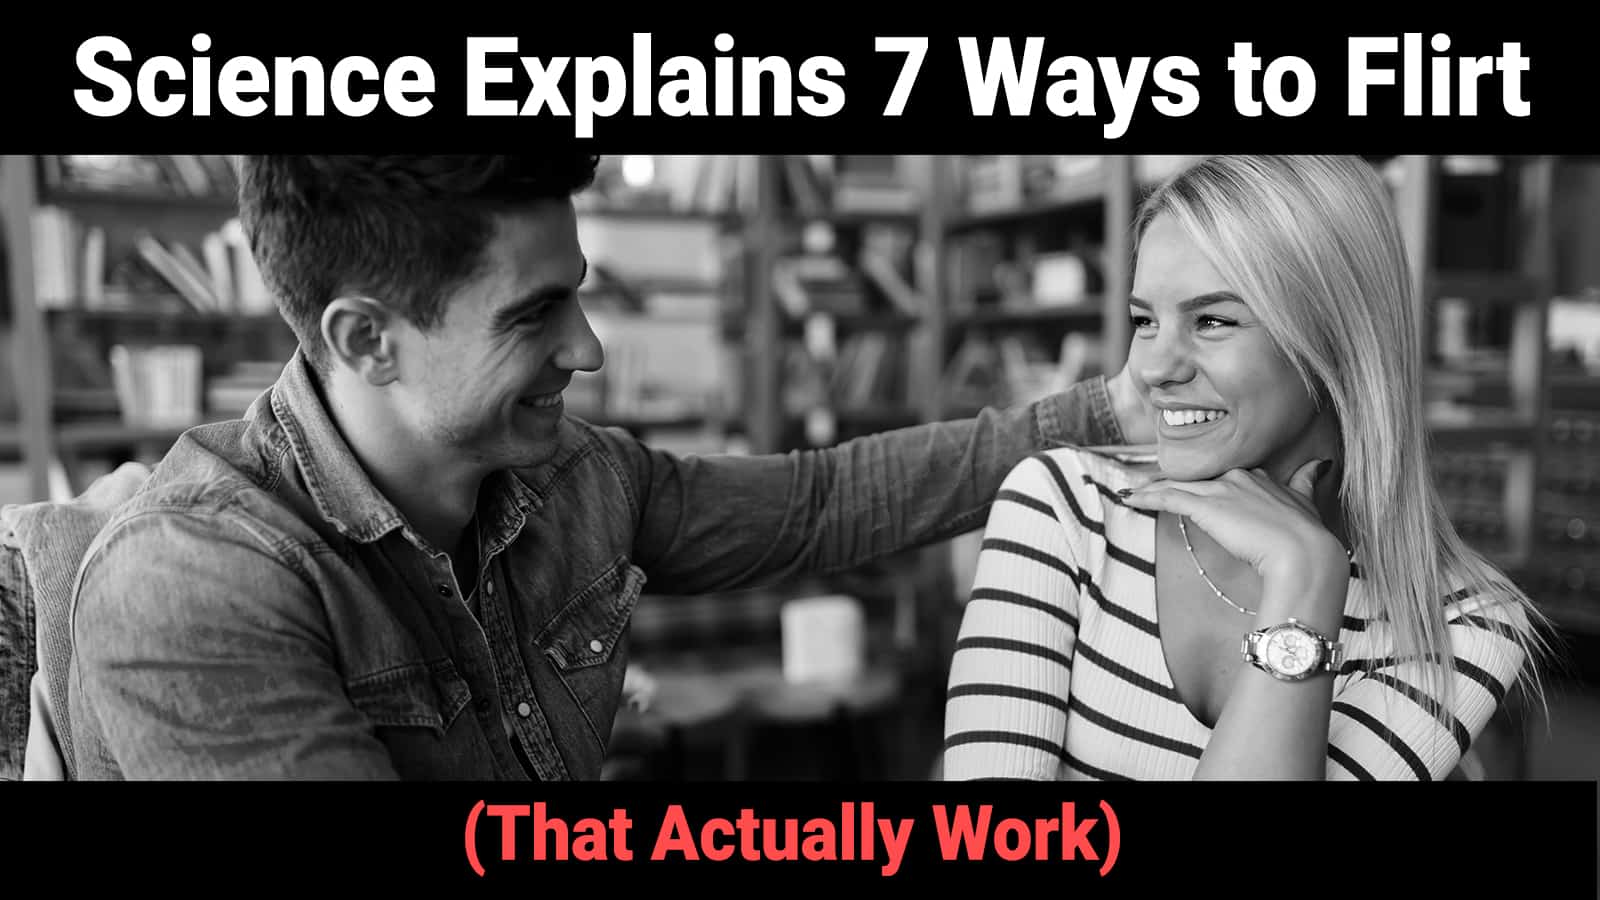 Science Explains 7 Ways to Flirt (That Actually Work)